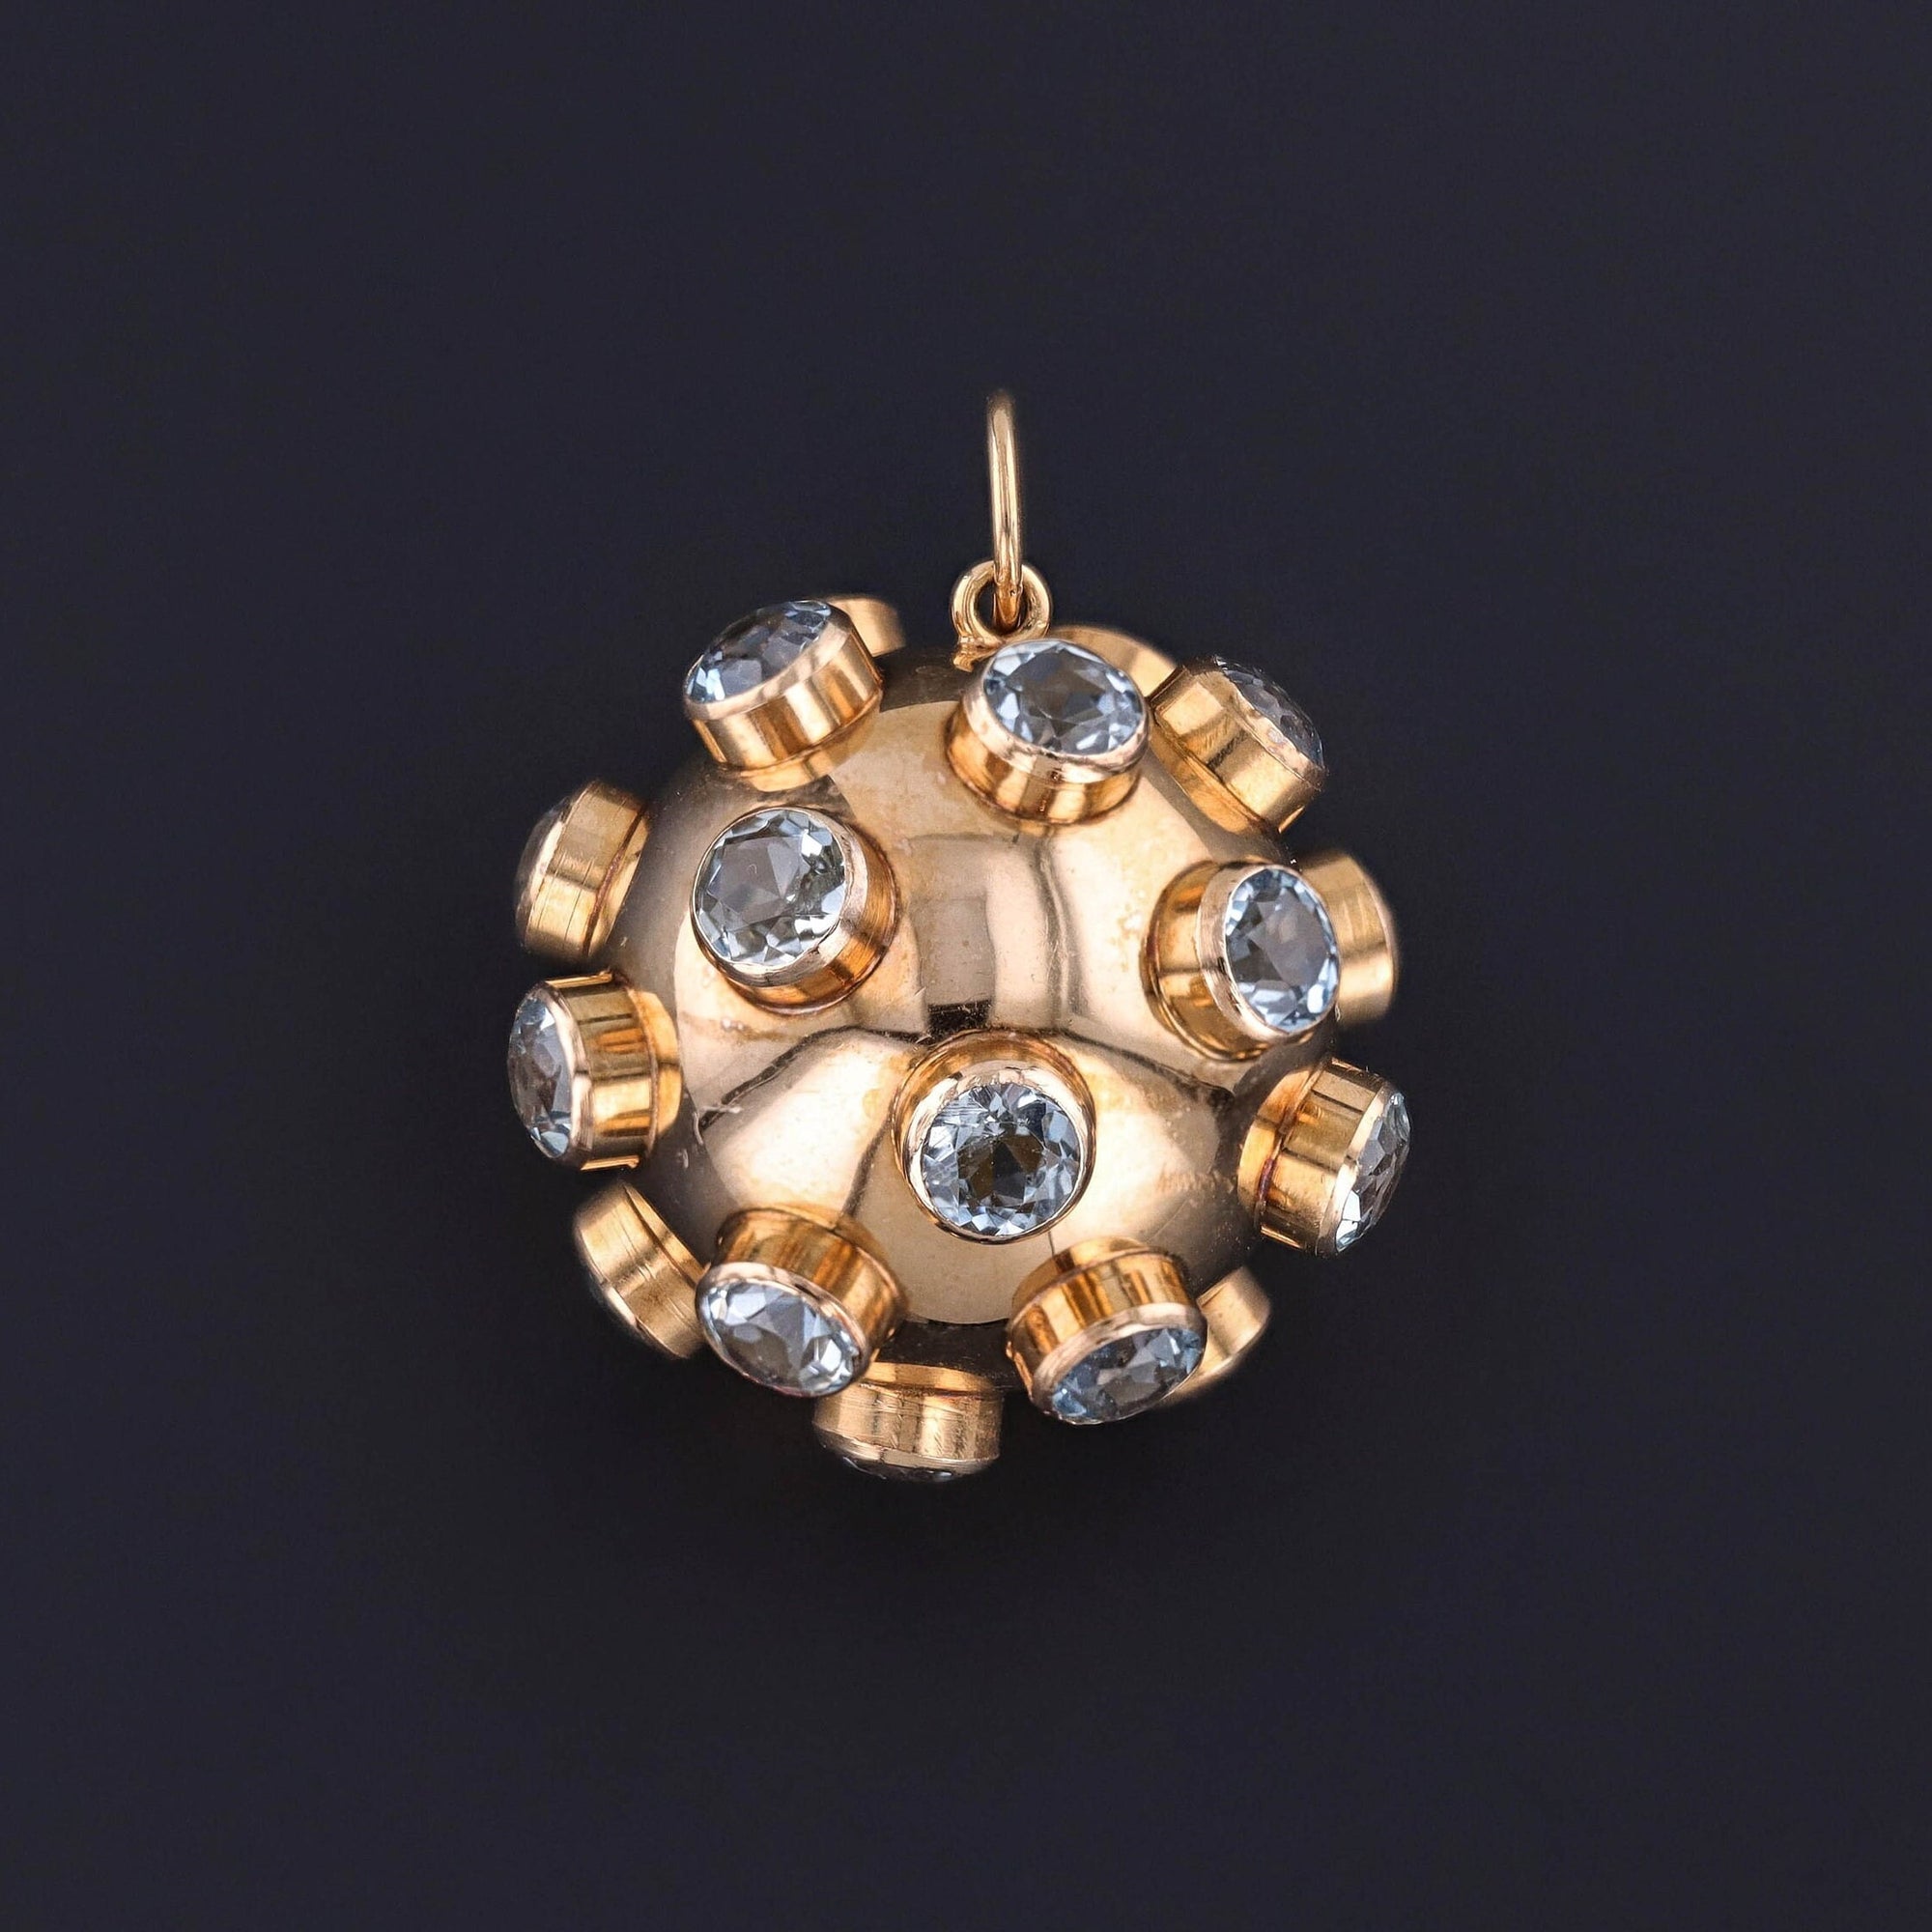 A vintage 18k gold sputnik pendant adorned with aquamarines. The substantial 18k gold piece dates to the 1960s and is a perfect gift for anyone who loves the space race or celestial items.